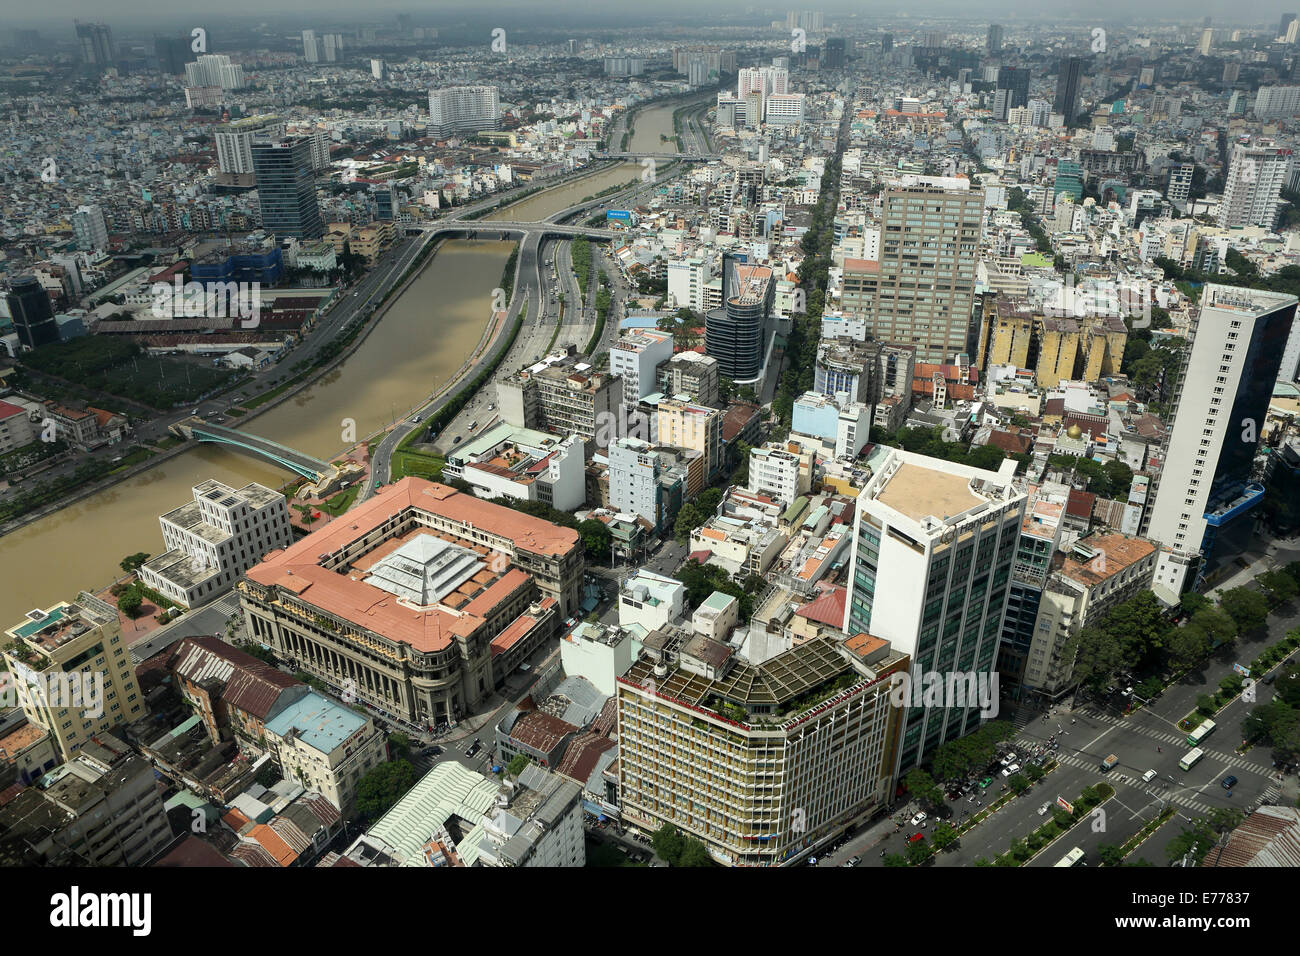 Ho Chi Minh City and the Saigon river in Vietnam. Stock Photo